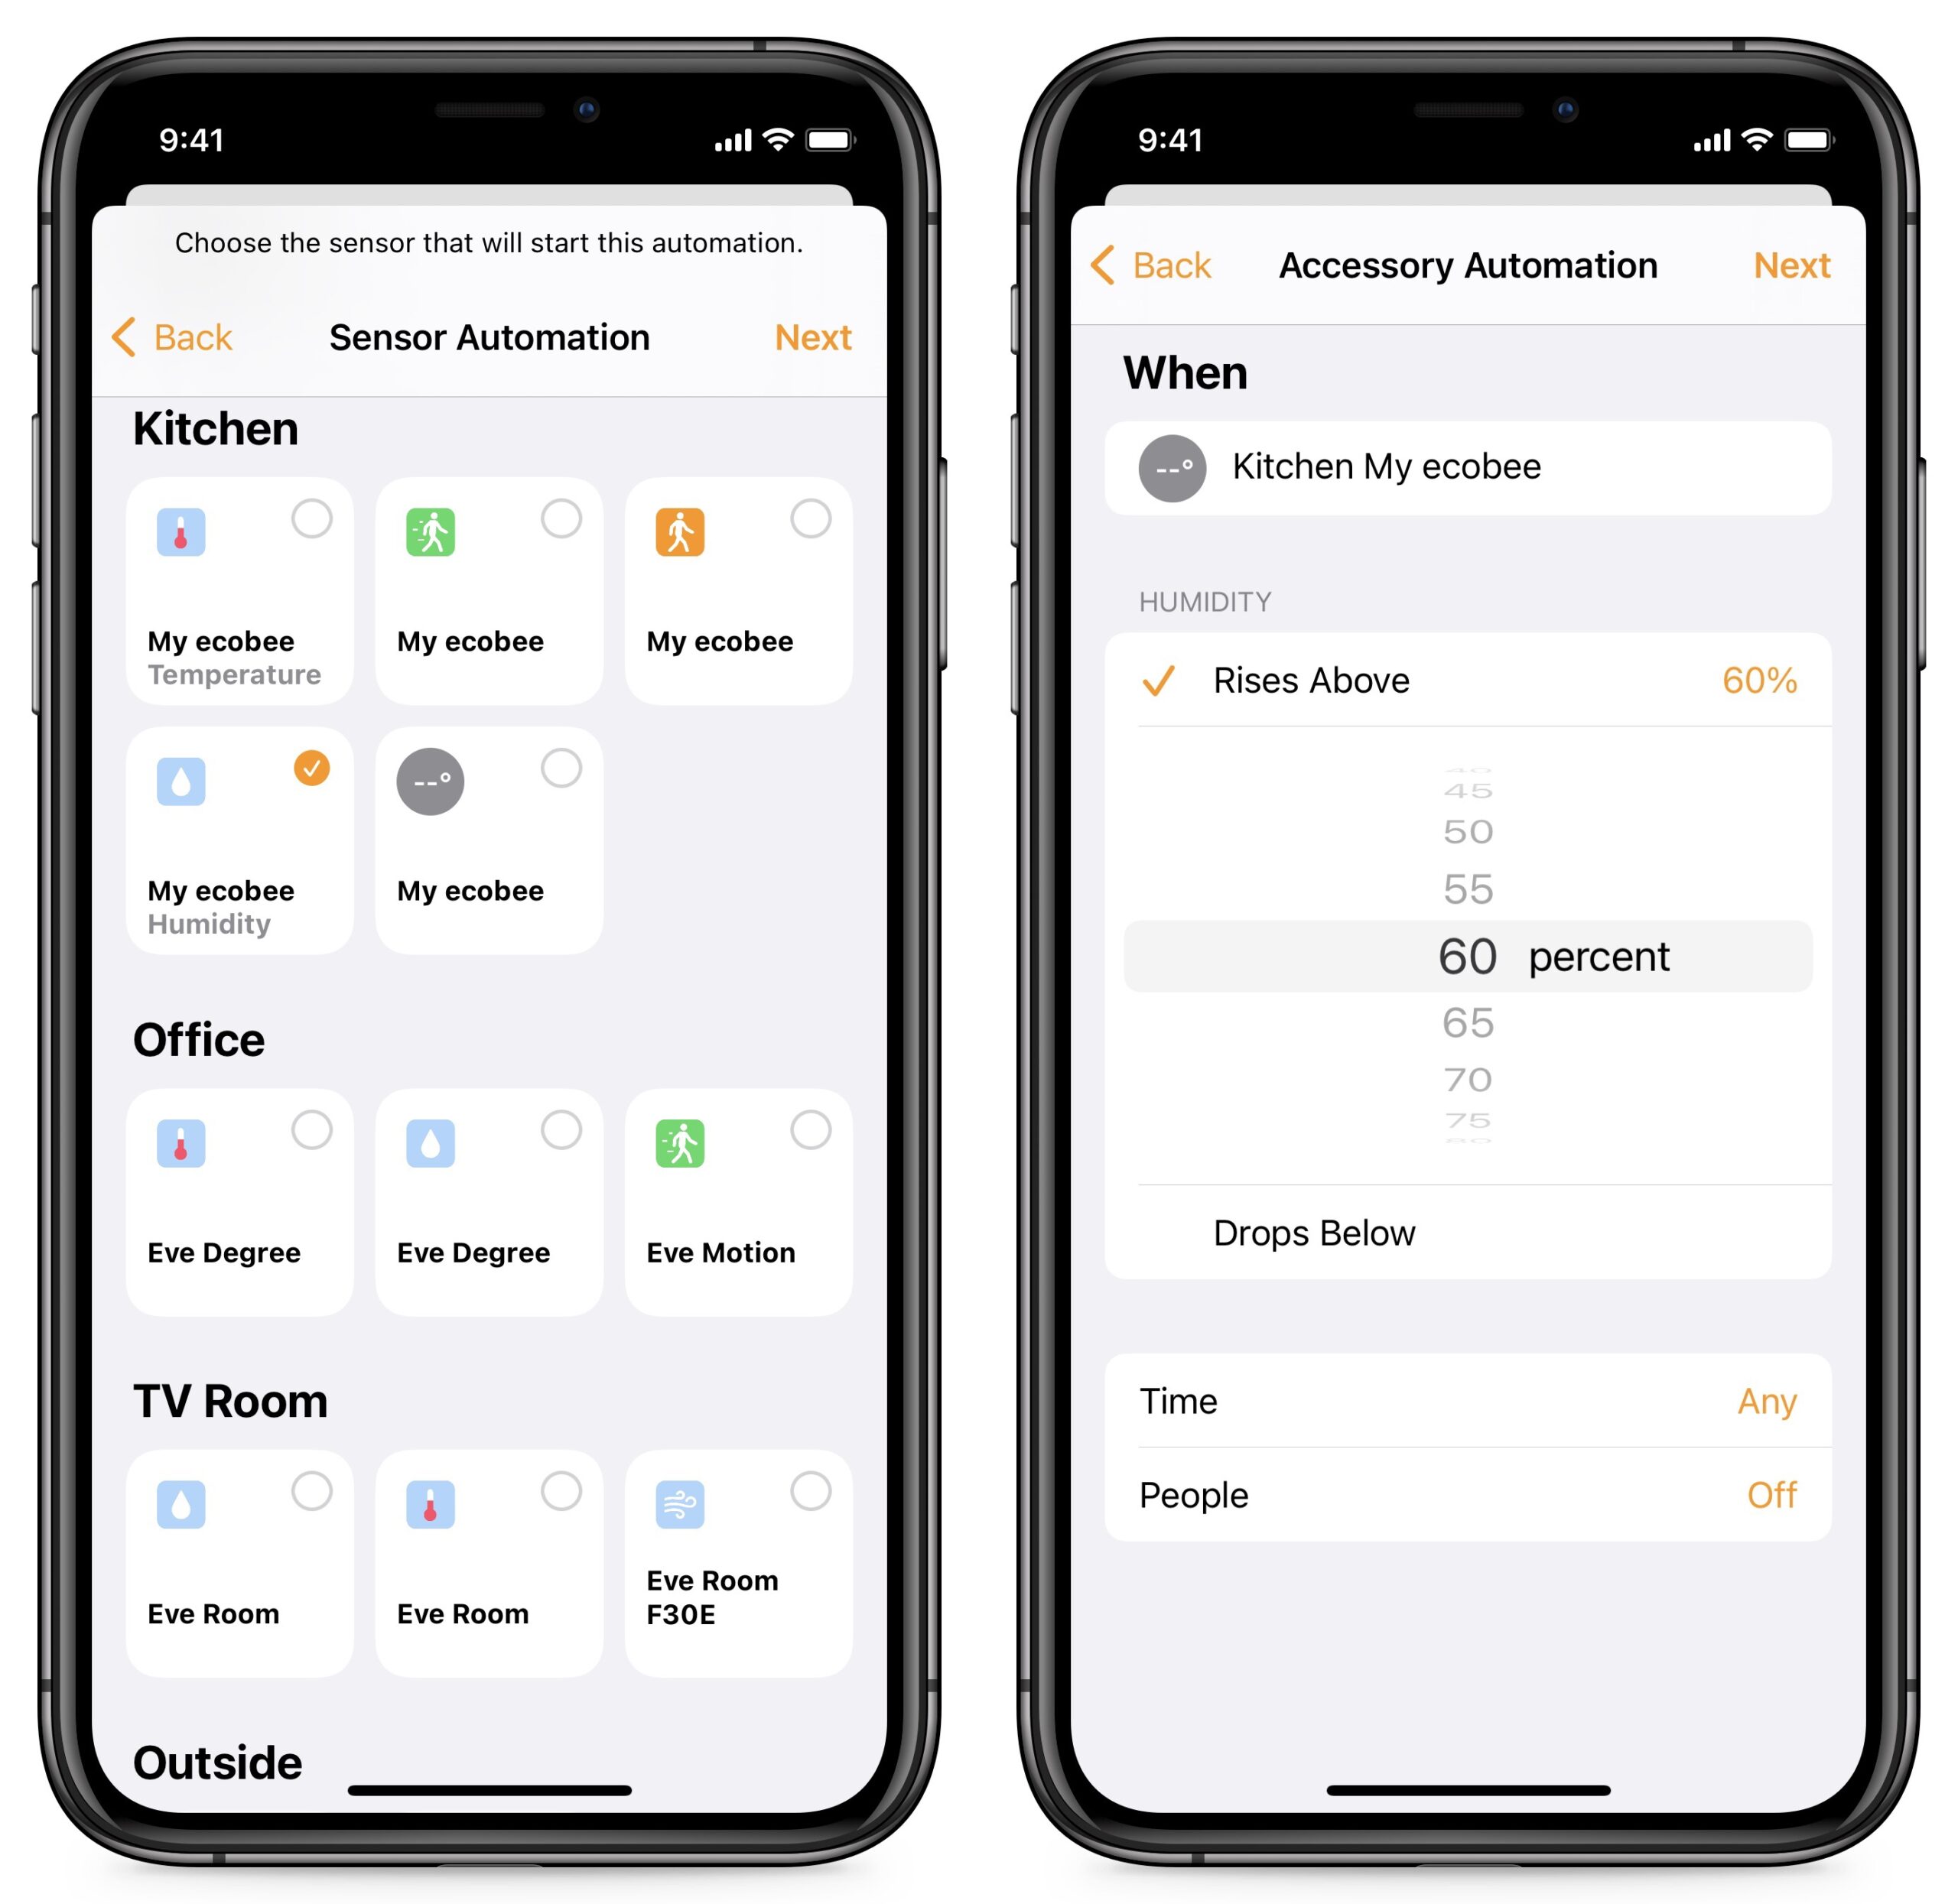 HomeKit automations based on humidity arrive in iOS 15.1 beta 2 - 9to5Mac